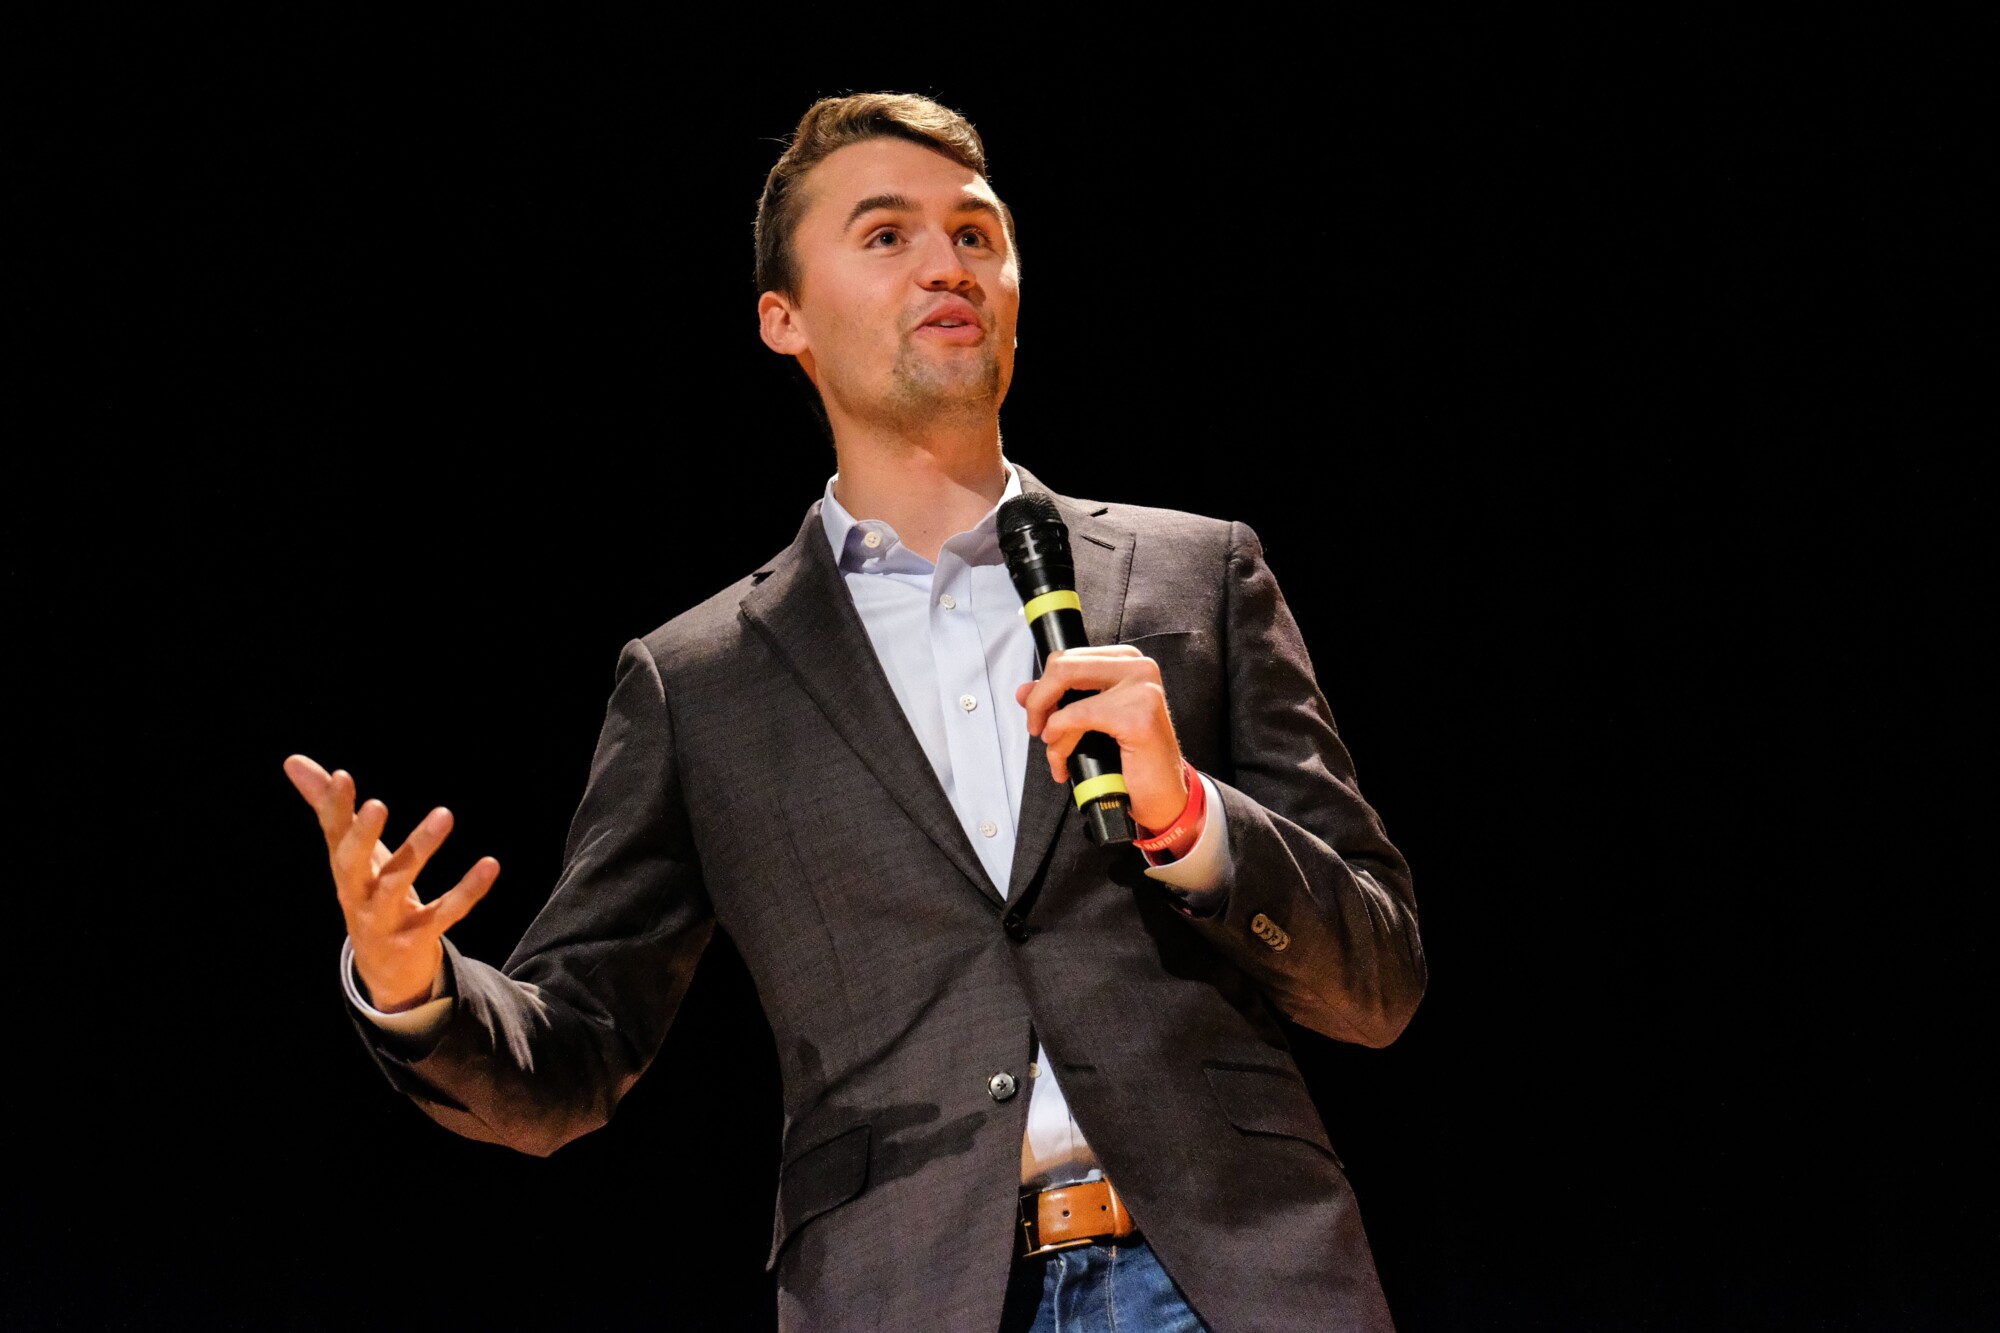 Conservative Activist Charlie Kirk Speaks at UC Davis as Protesters Try to Shut Down Event